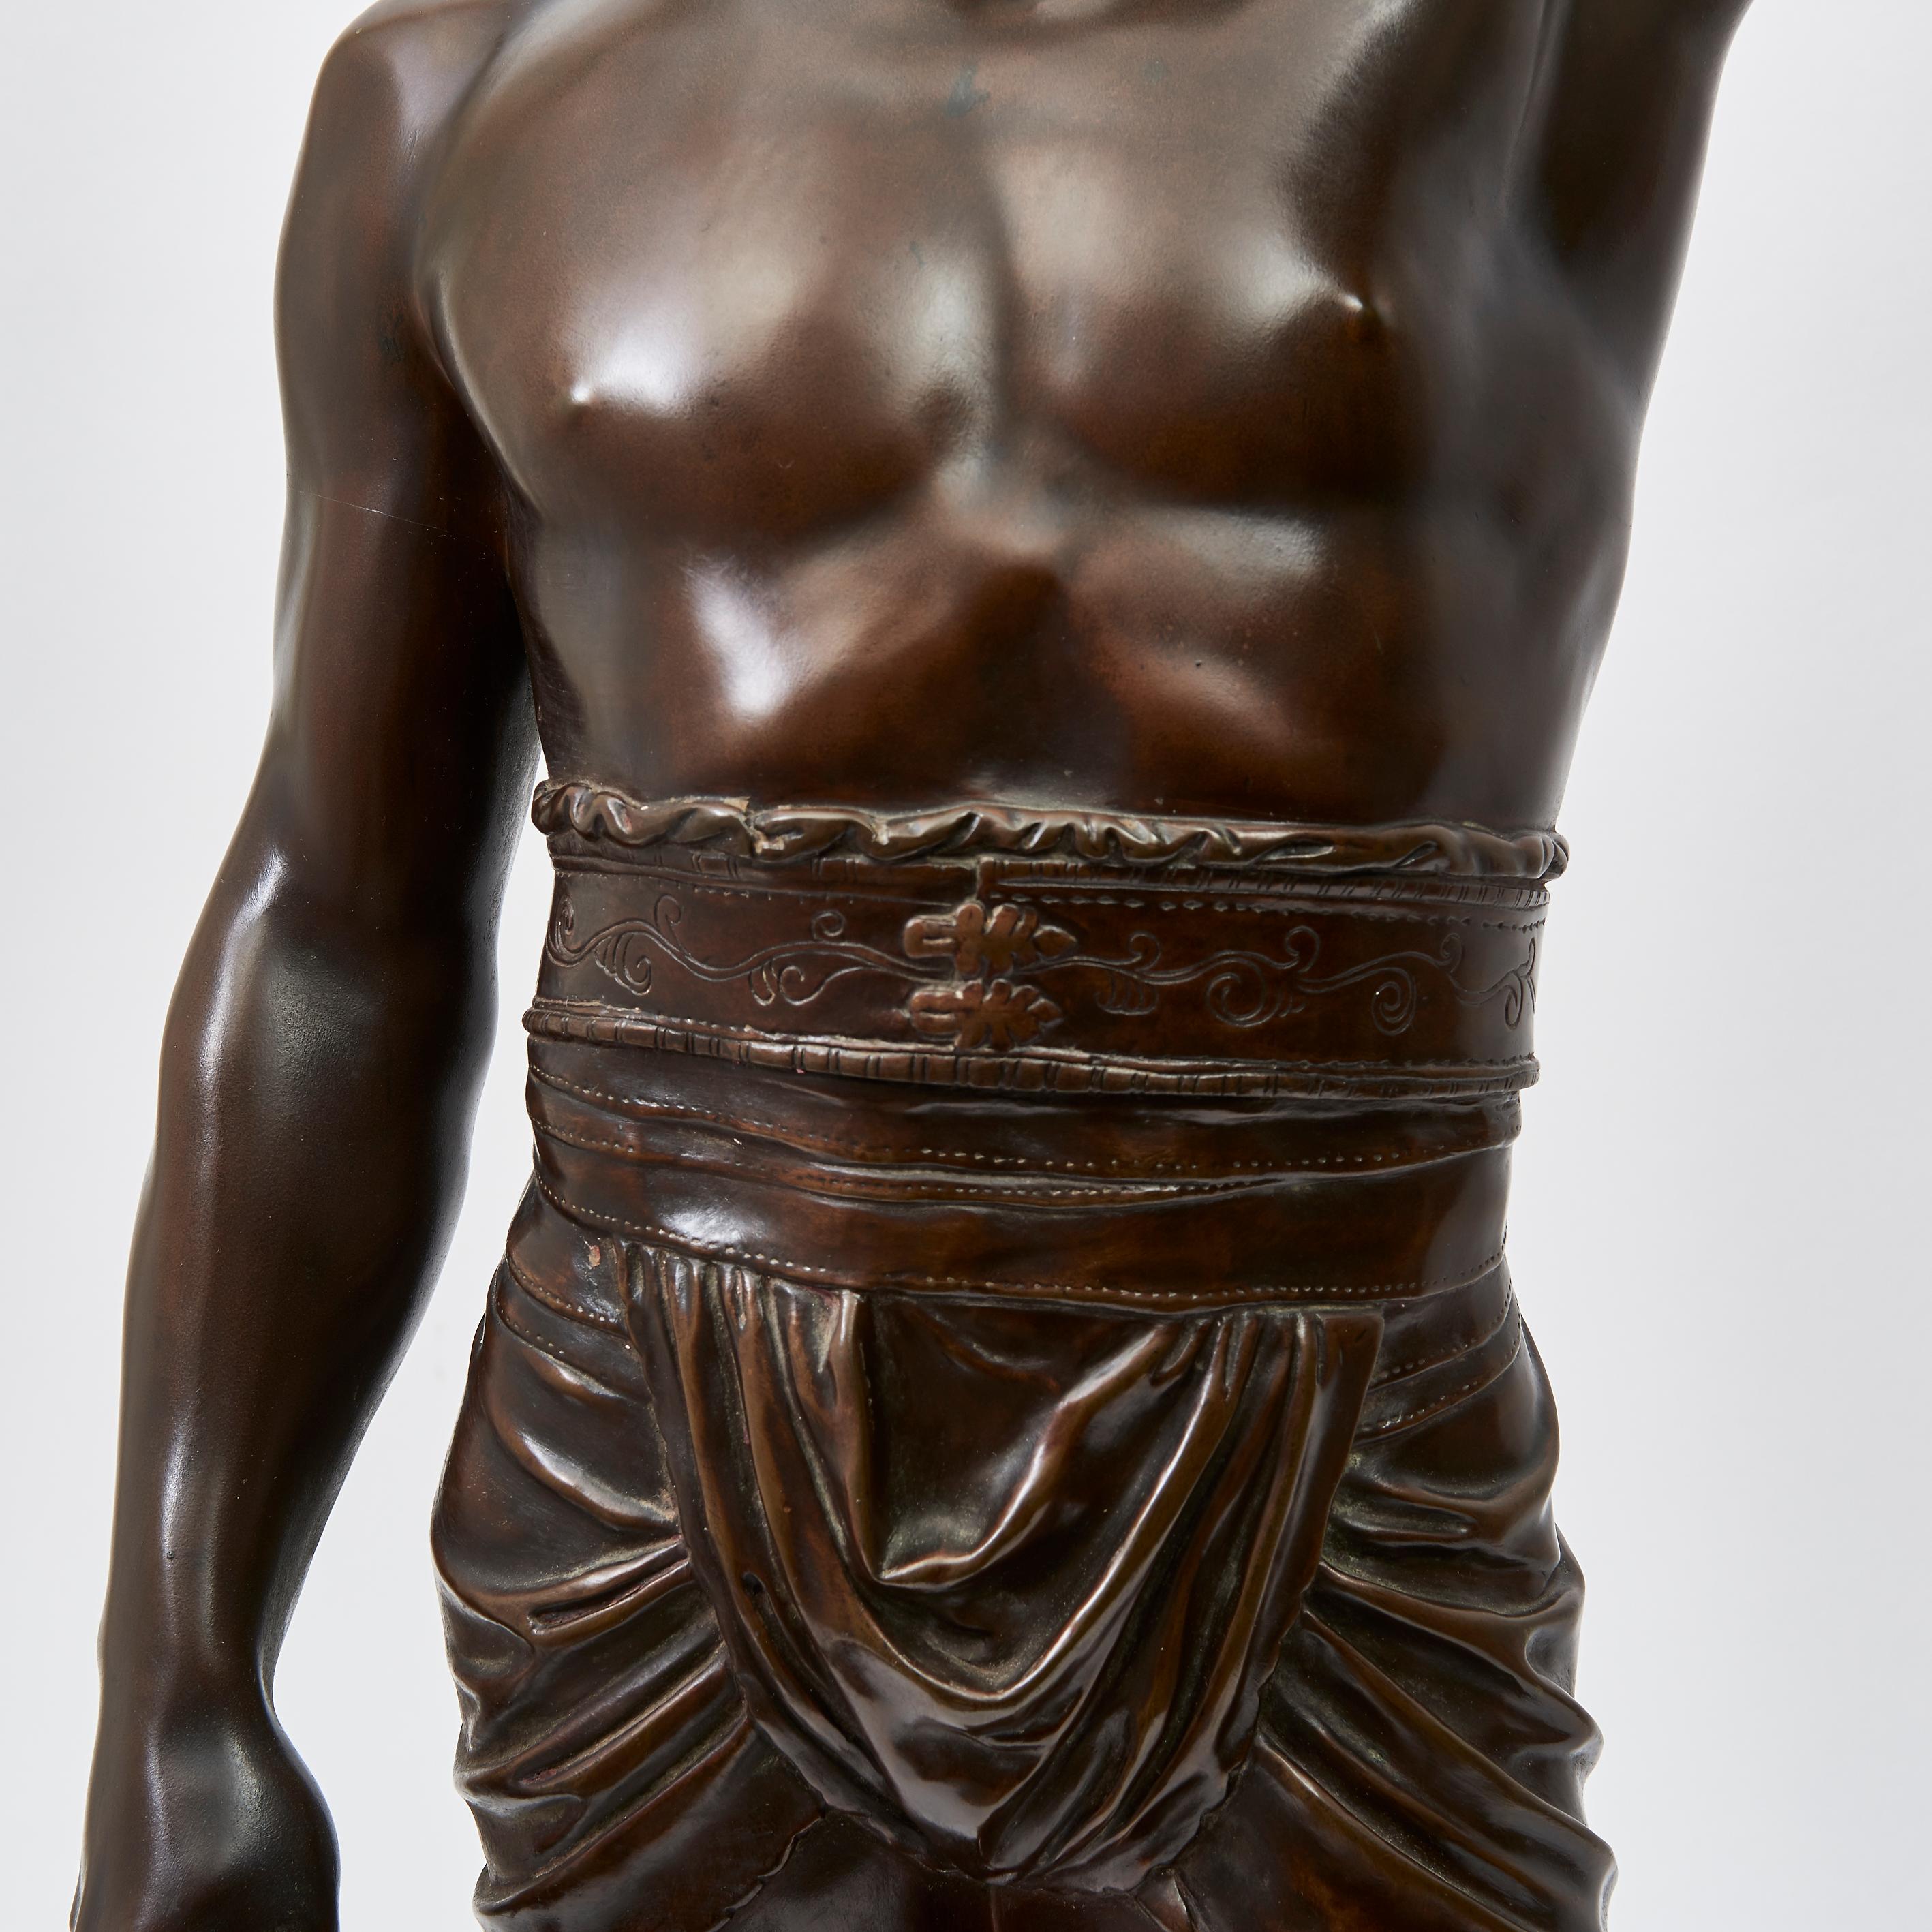 Bronze sculpture of a Gladiator, signed on the reverse by the French Sculptor Emile Guillemin (1841-1907). The Roman gladiator proudly brandishing his shield in the air, spear in other hand, with classical muscular form. The sculpture inscribed at